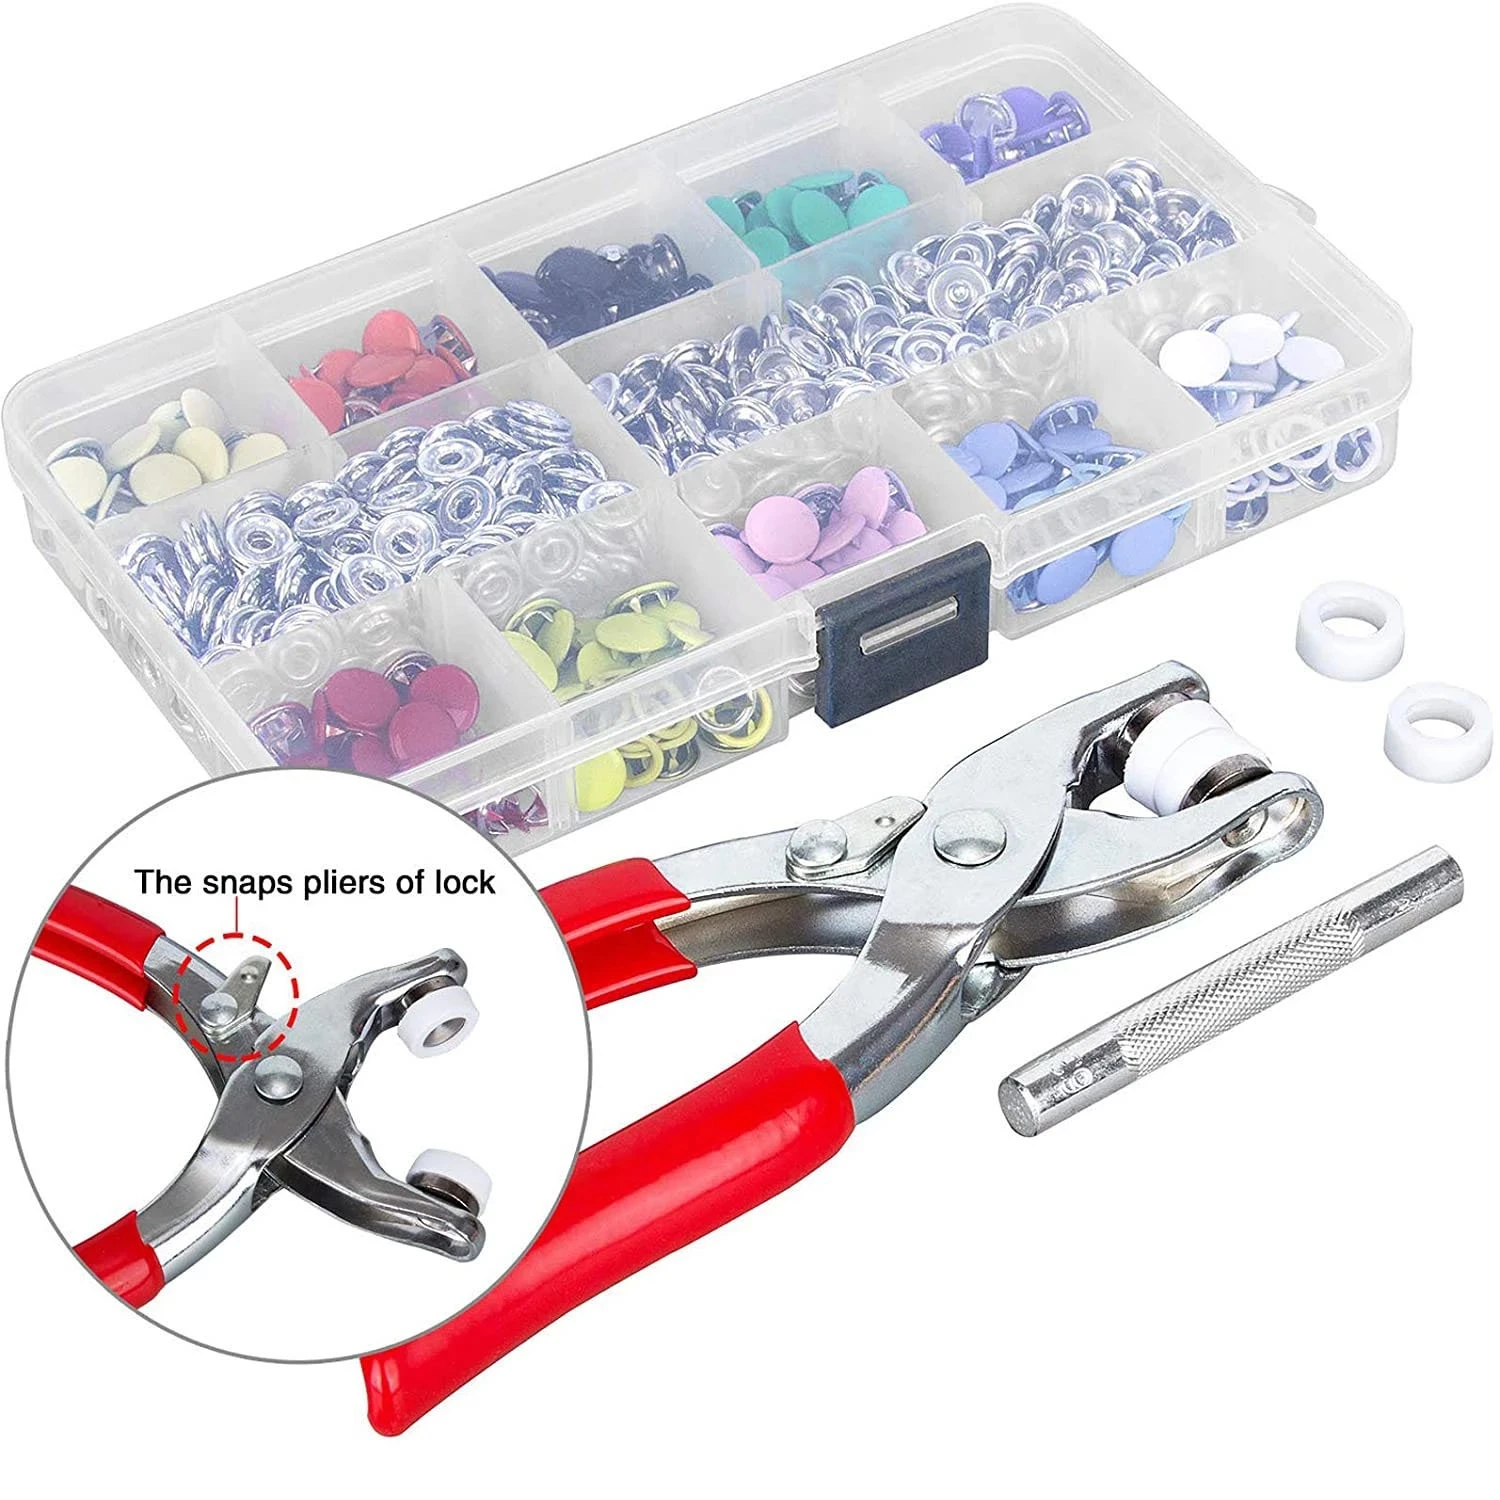  Heavy Duty Snap Fastener Tool Adjustable Snap Setter Tool, DIY  100 Sets Metal Snaps Buttons with Fastener Pliers Press Tool Kit for Sewing  and Crafting (10 Colors)